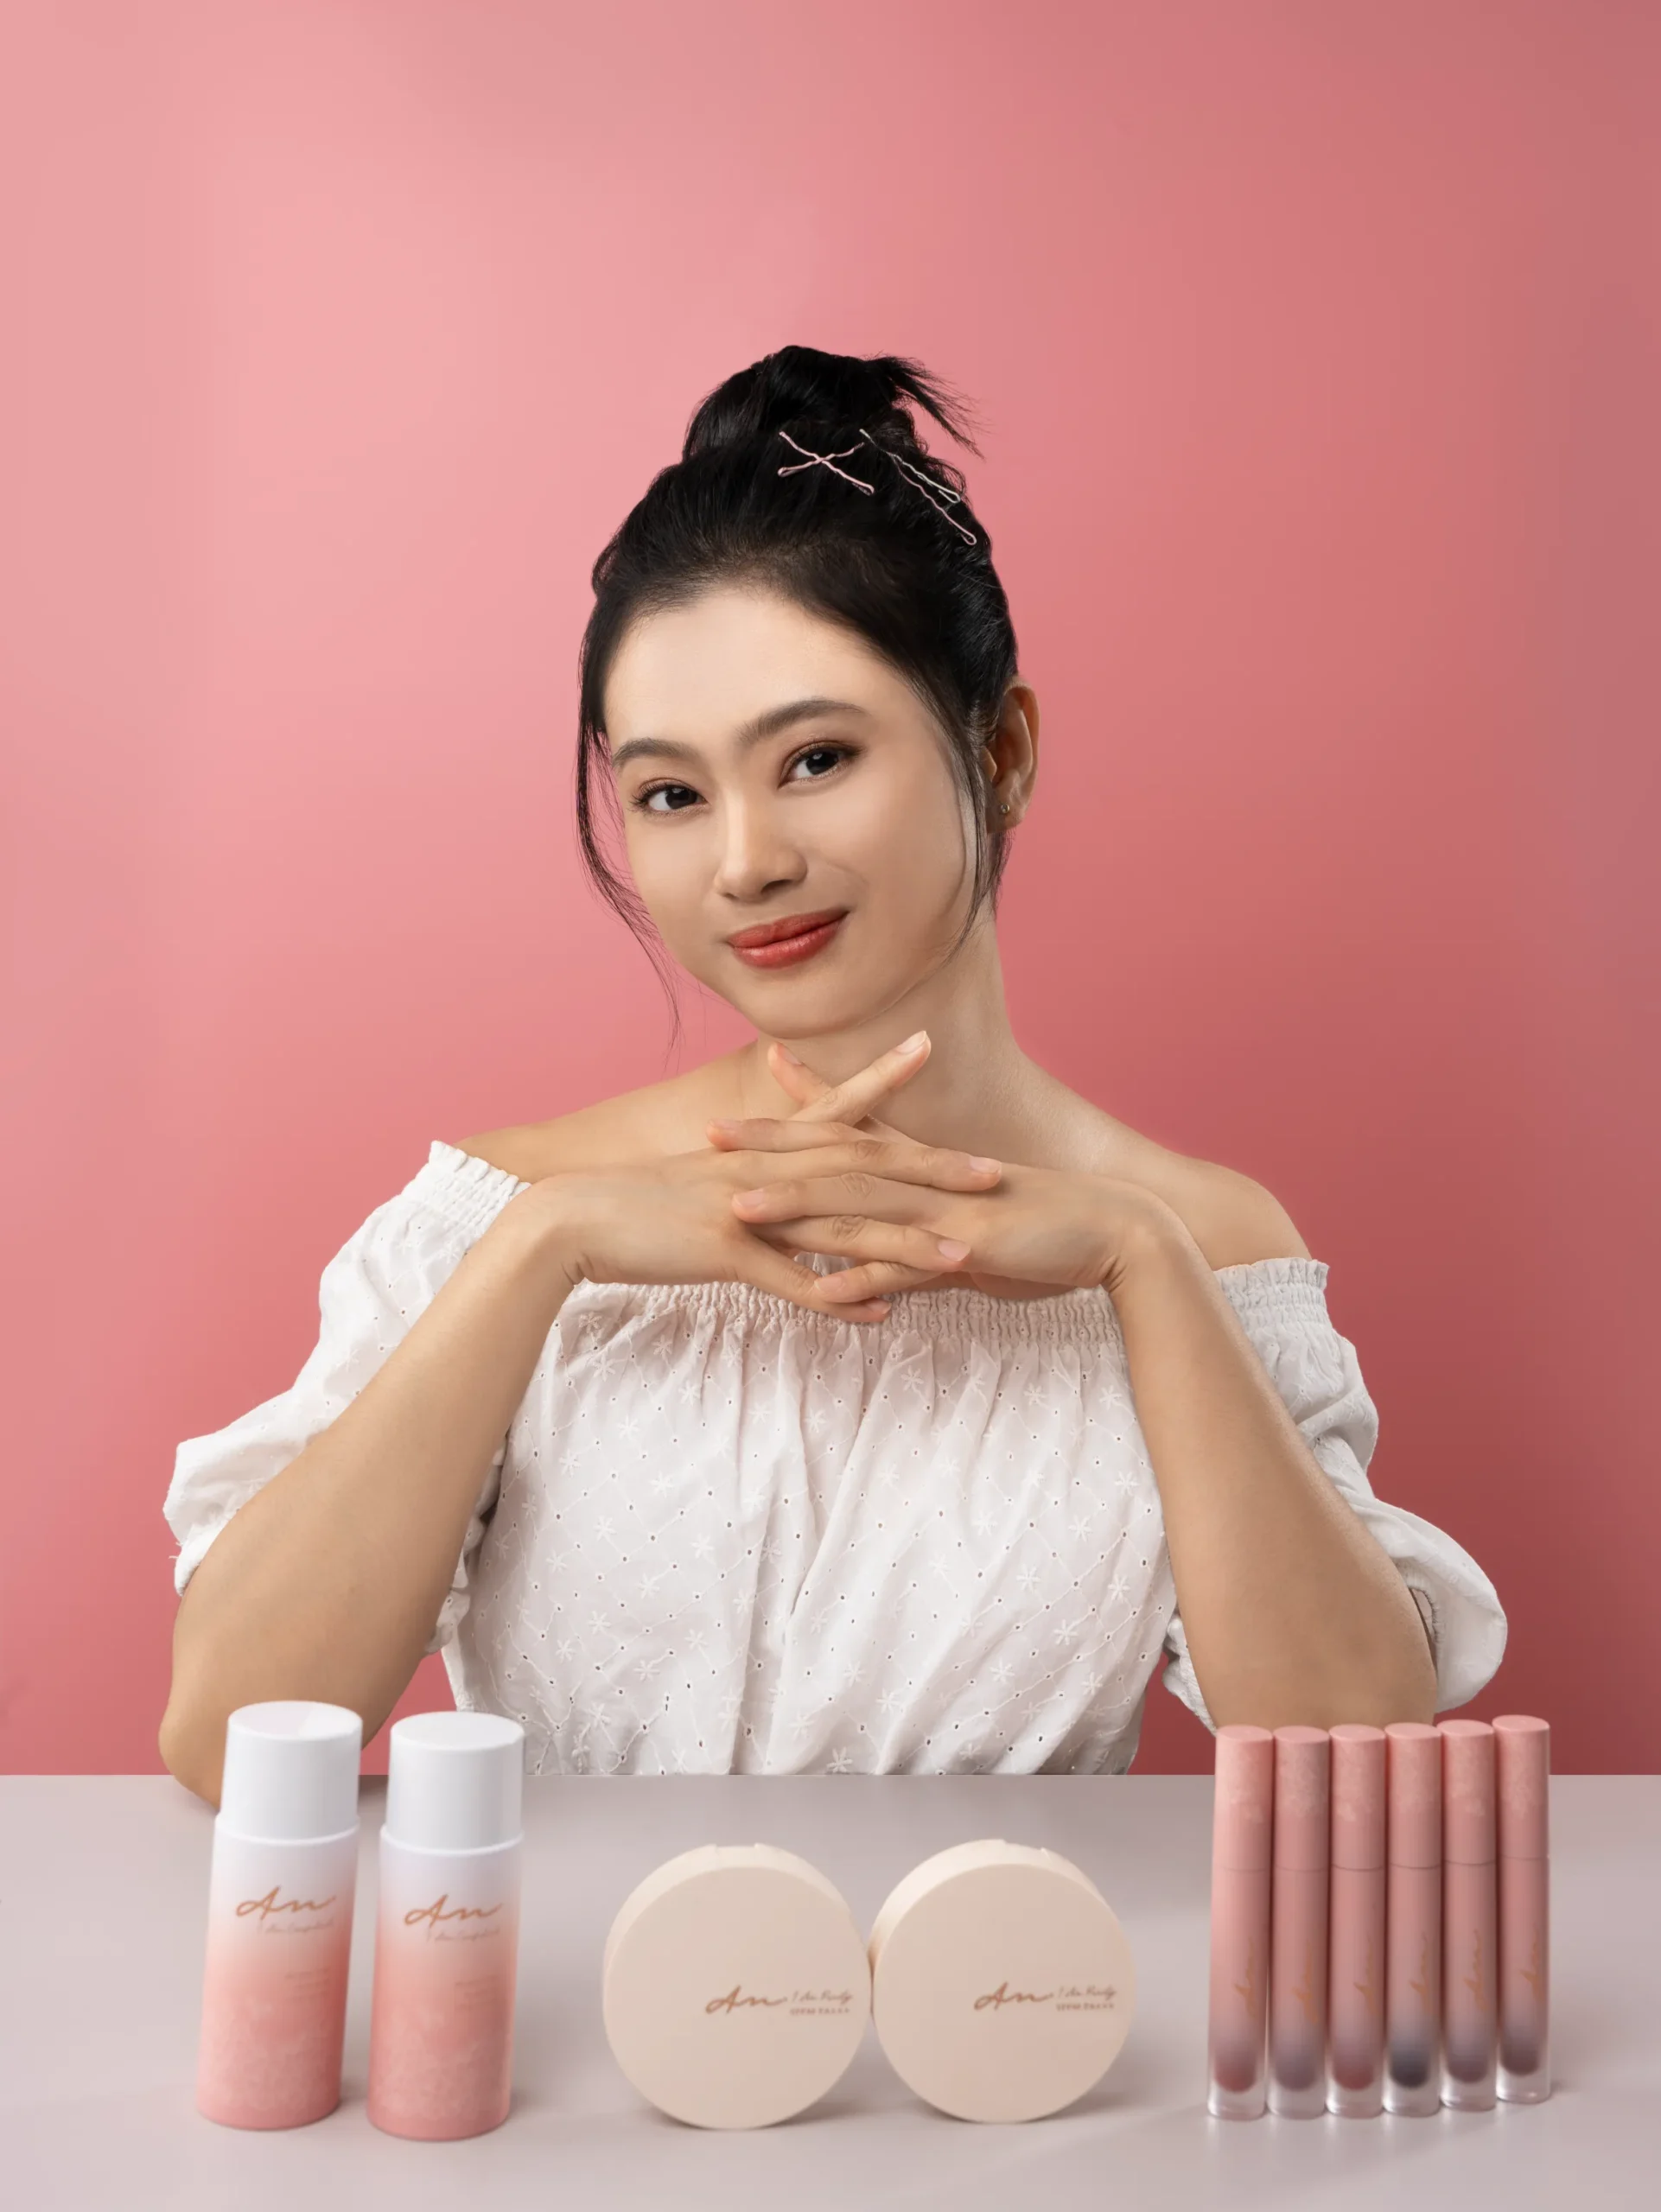 Confident woman with an elegant updo hairstyle, wearing a white off-the-shoulder blouse, poses behind a display of 'Alyssa Madeline' beauty products, including two bottles, two compact powders, and five lip glosses, all arrayed neatly against a soft pink background.